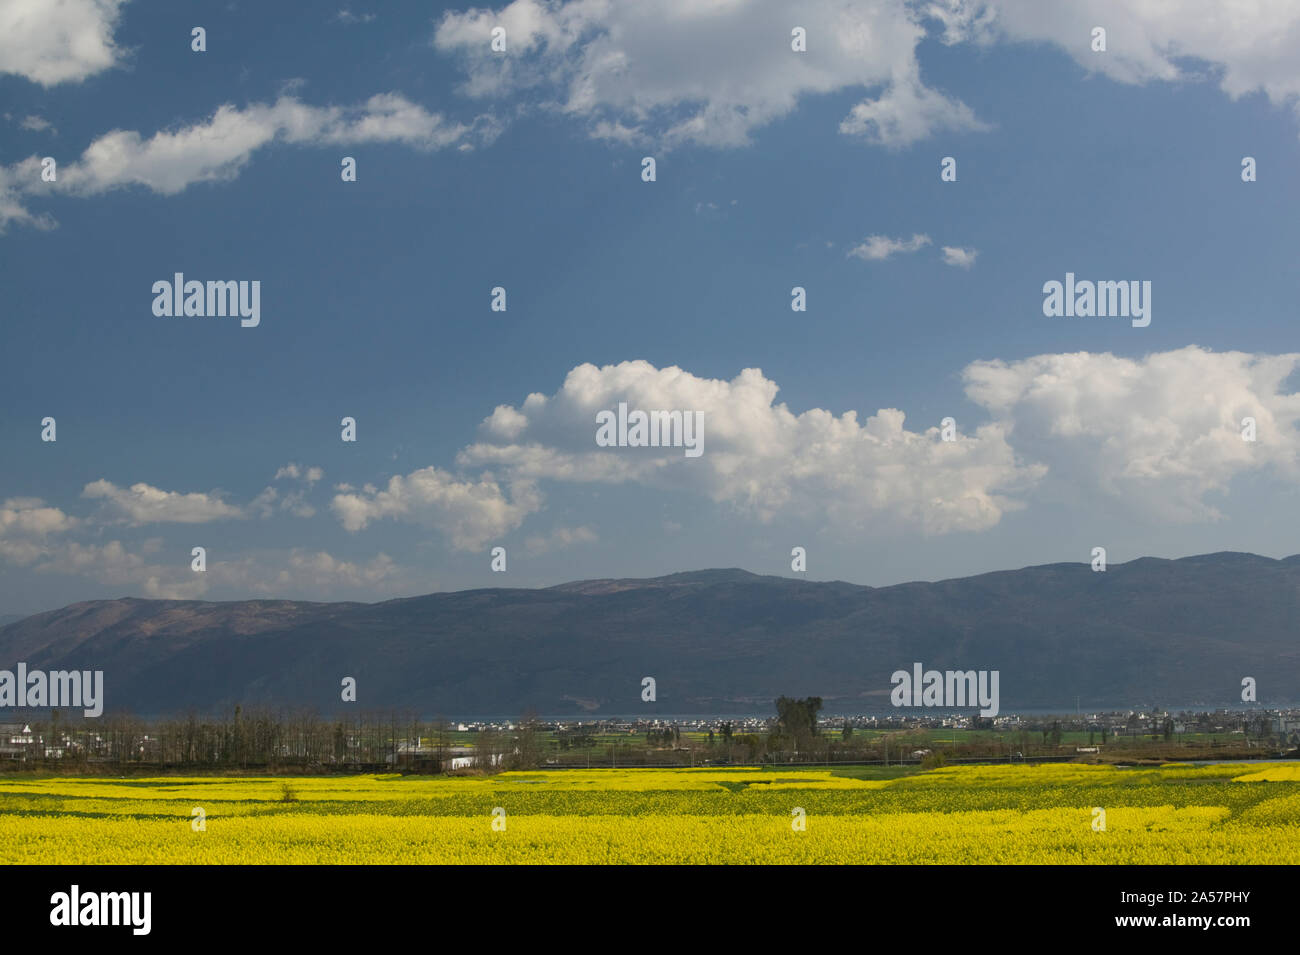 Mustard fields with mountains in the background, Old Town, Dali, Yunnan Province, China Stock Photo